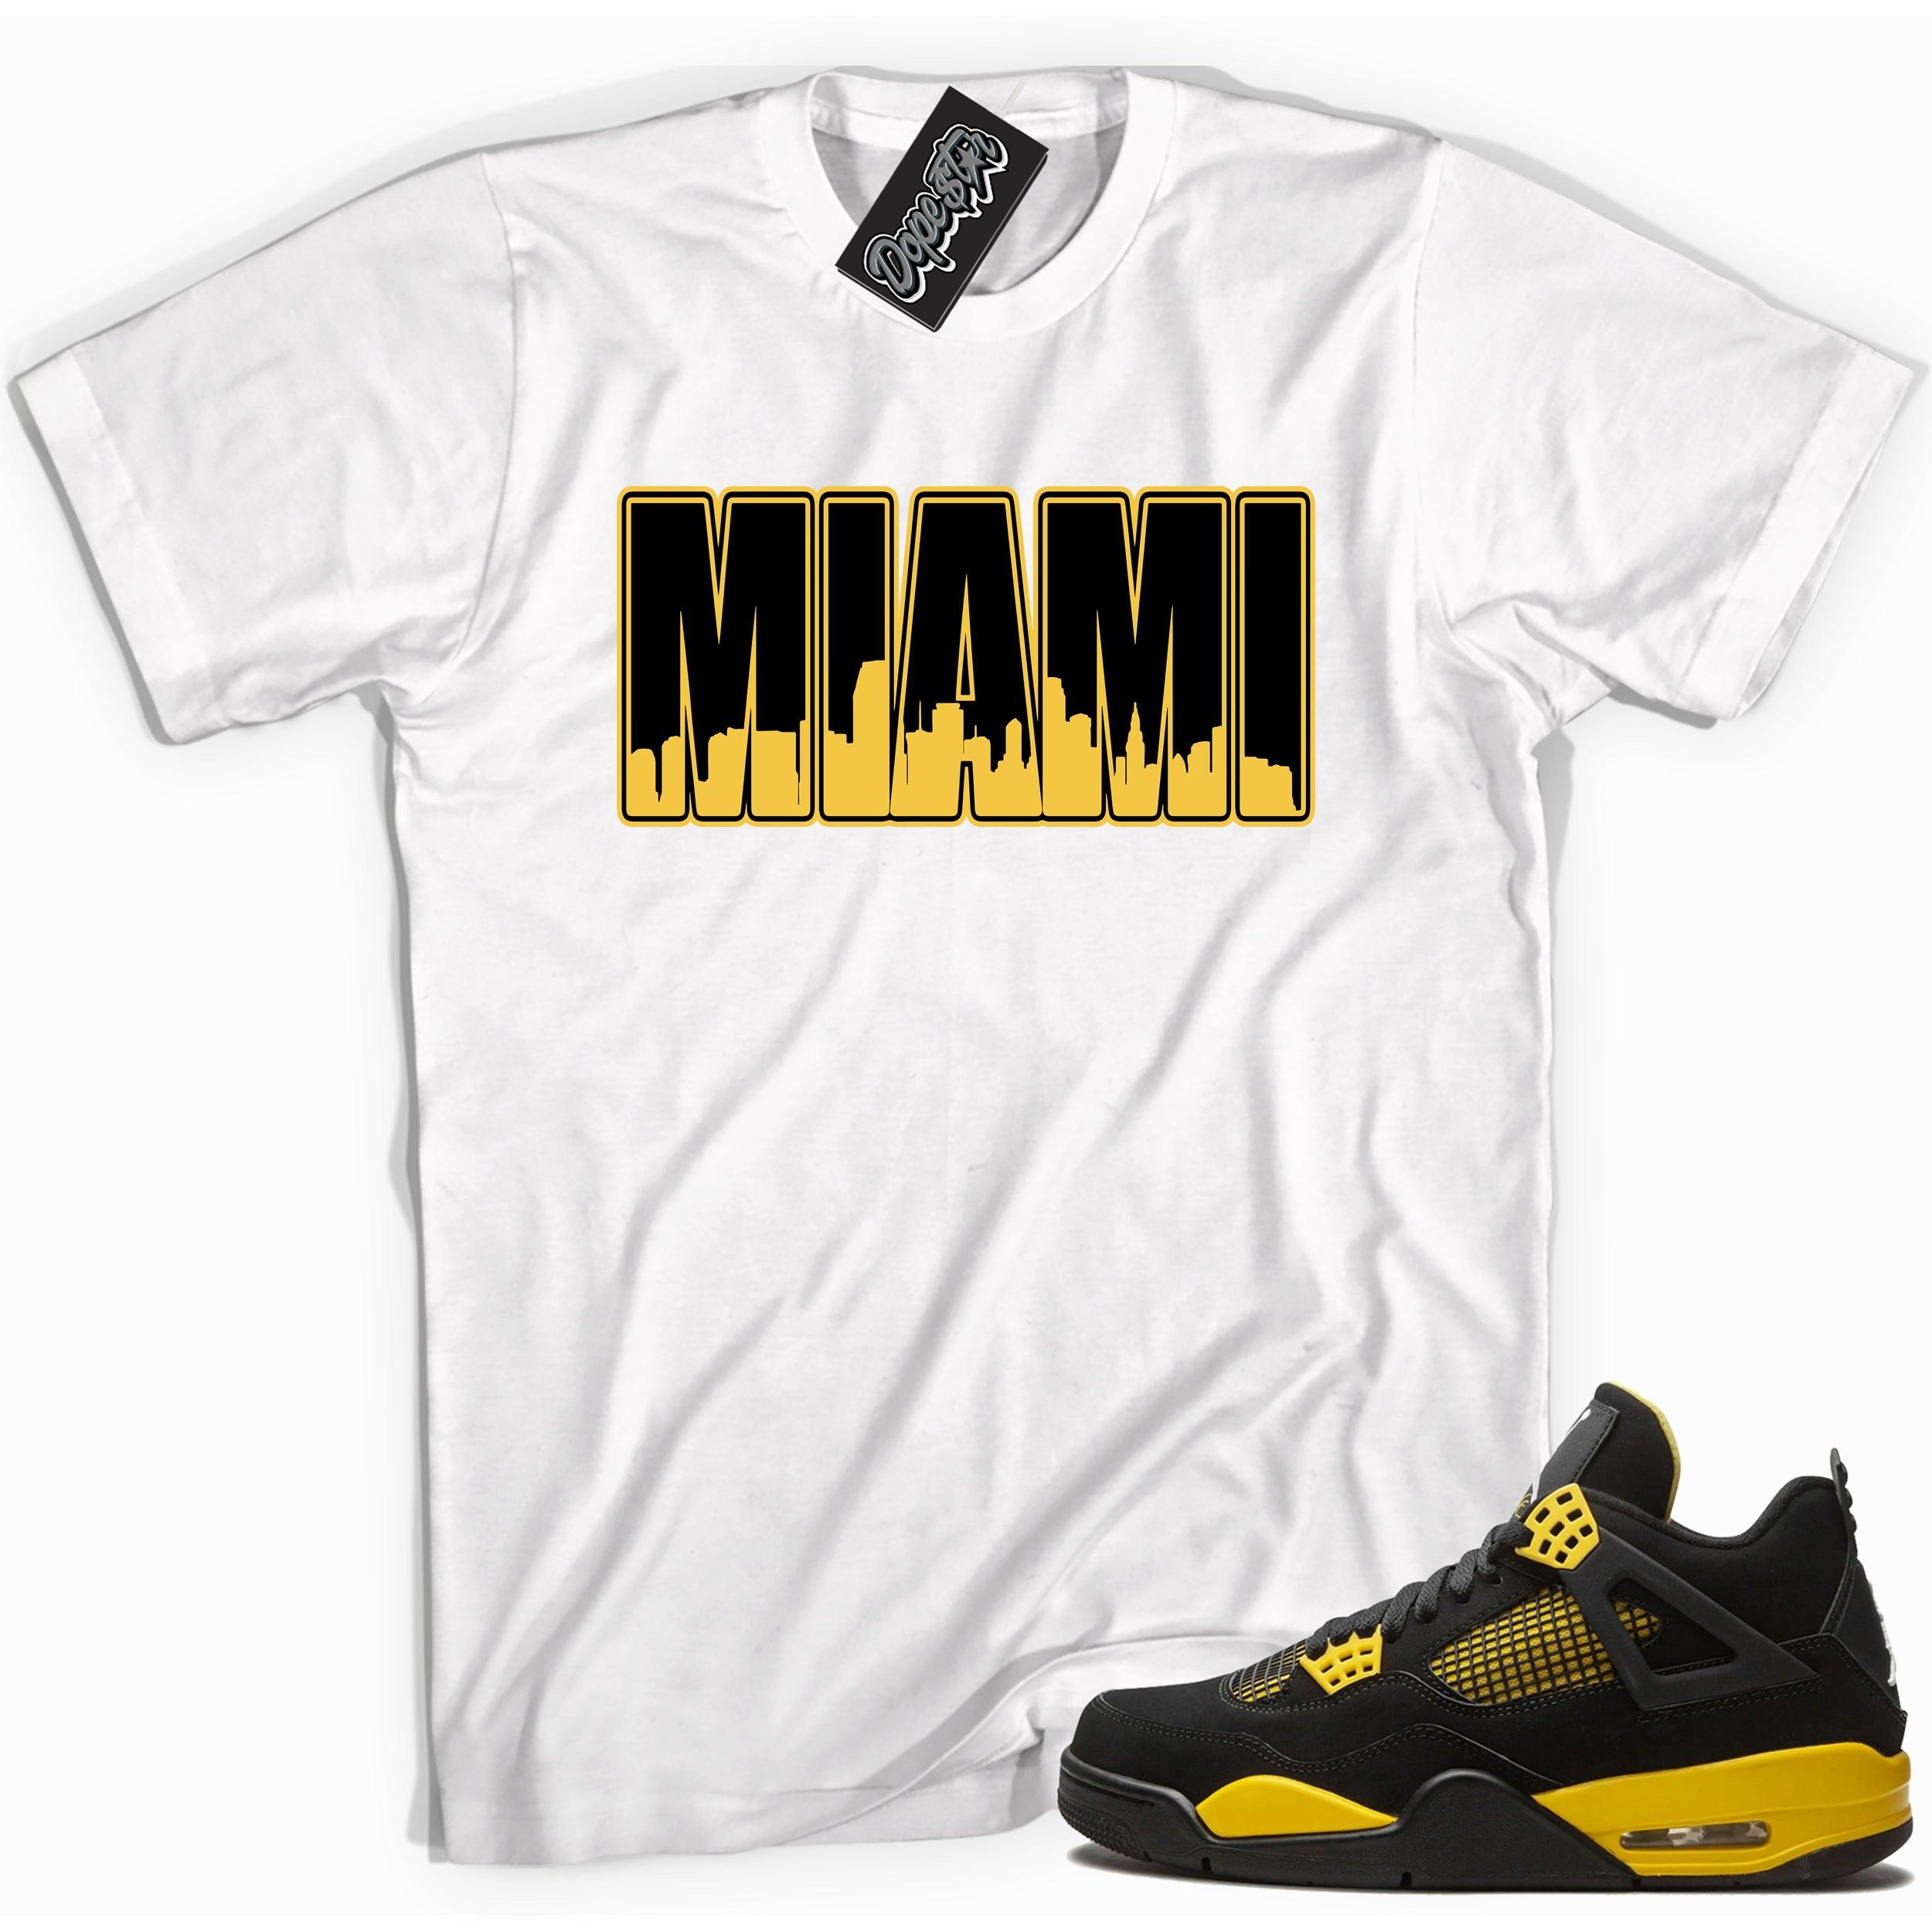 Cool white graphic tee with 'miami' print, that perfectly matches Air Jordan 4 Thunder sneakers